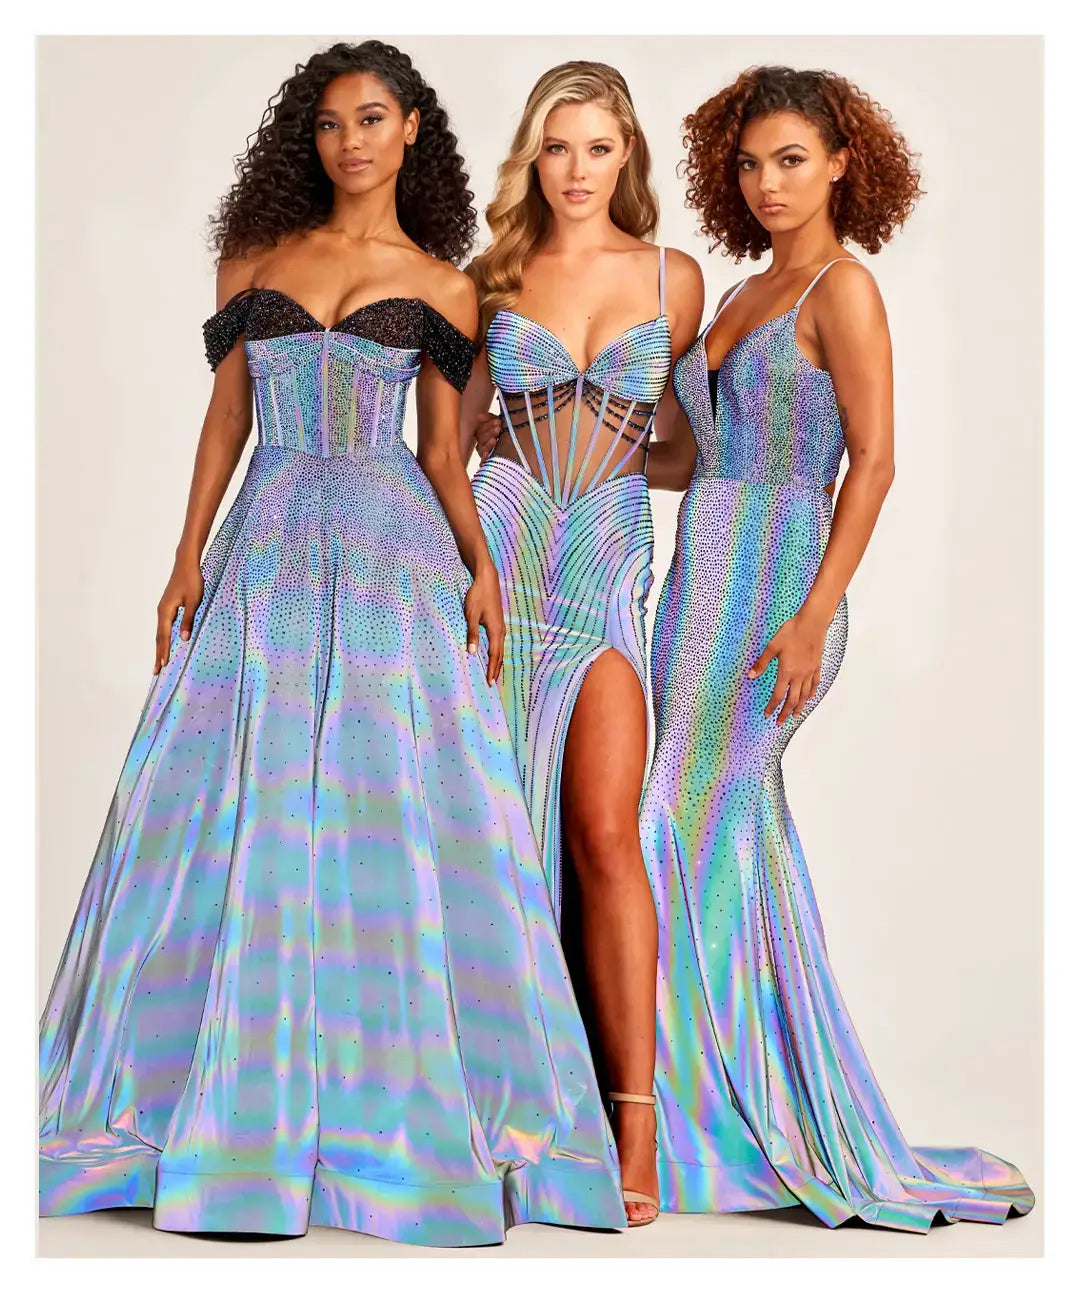 The Ellie Wilde EW35702 SUPERNOVA Holographic Sheer Corset Prom Dress Slit V Neck Gown is perfect for special occasions. Crafted with a romantic sheer illusion bodice, intricate metallic beading, and a striking slit skirt, this gown is the perfect combination of glamour and femininity. The corset bodice ensures a flattering fit, while the unexpected cut of the neckline adds drama and sophistication.